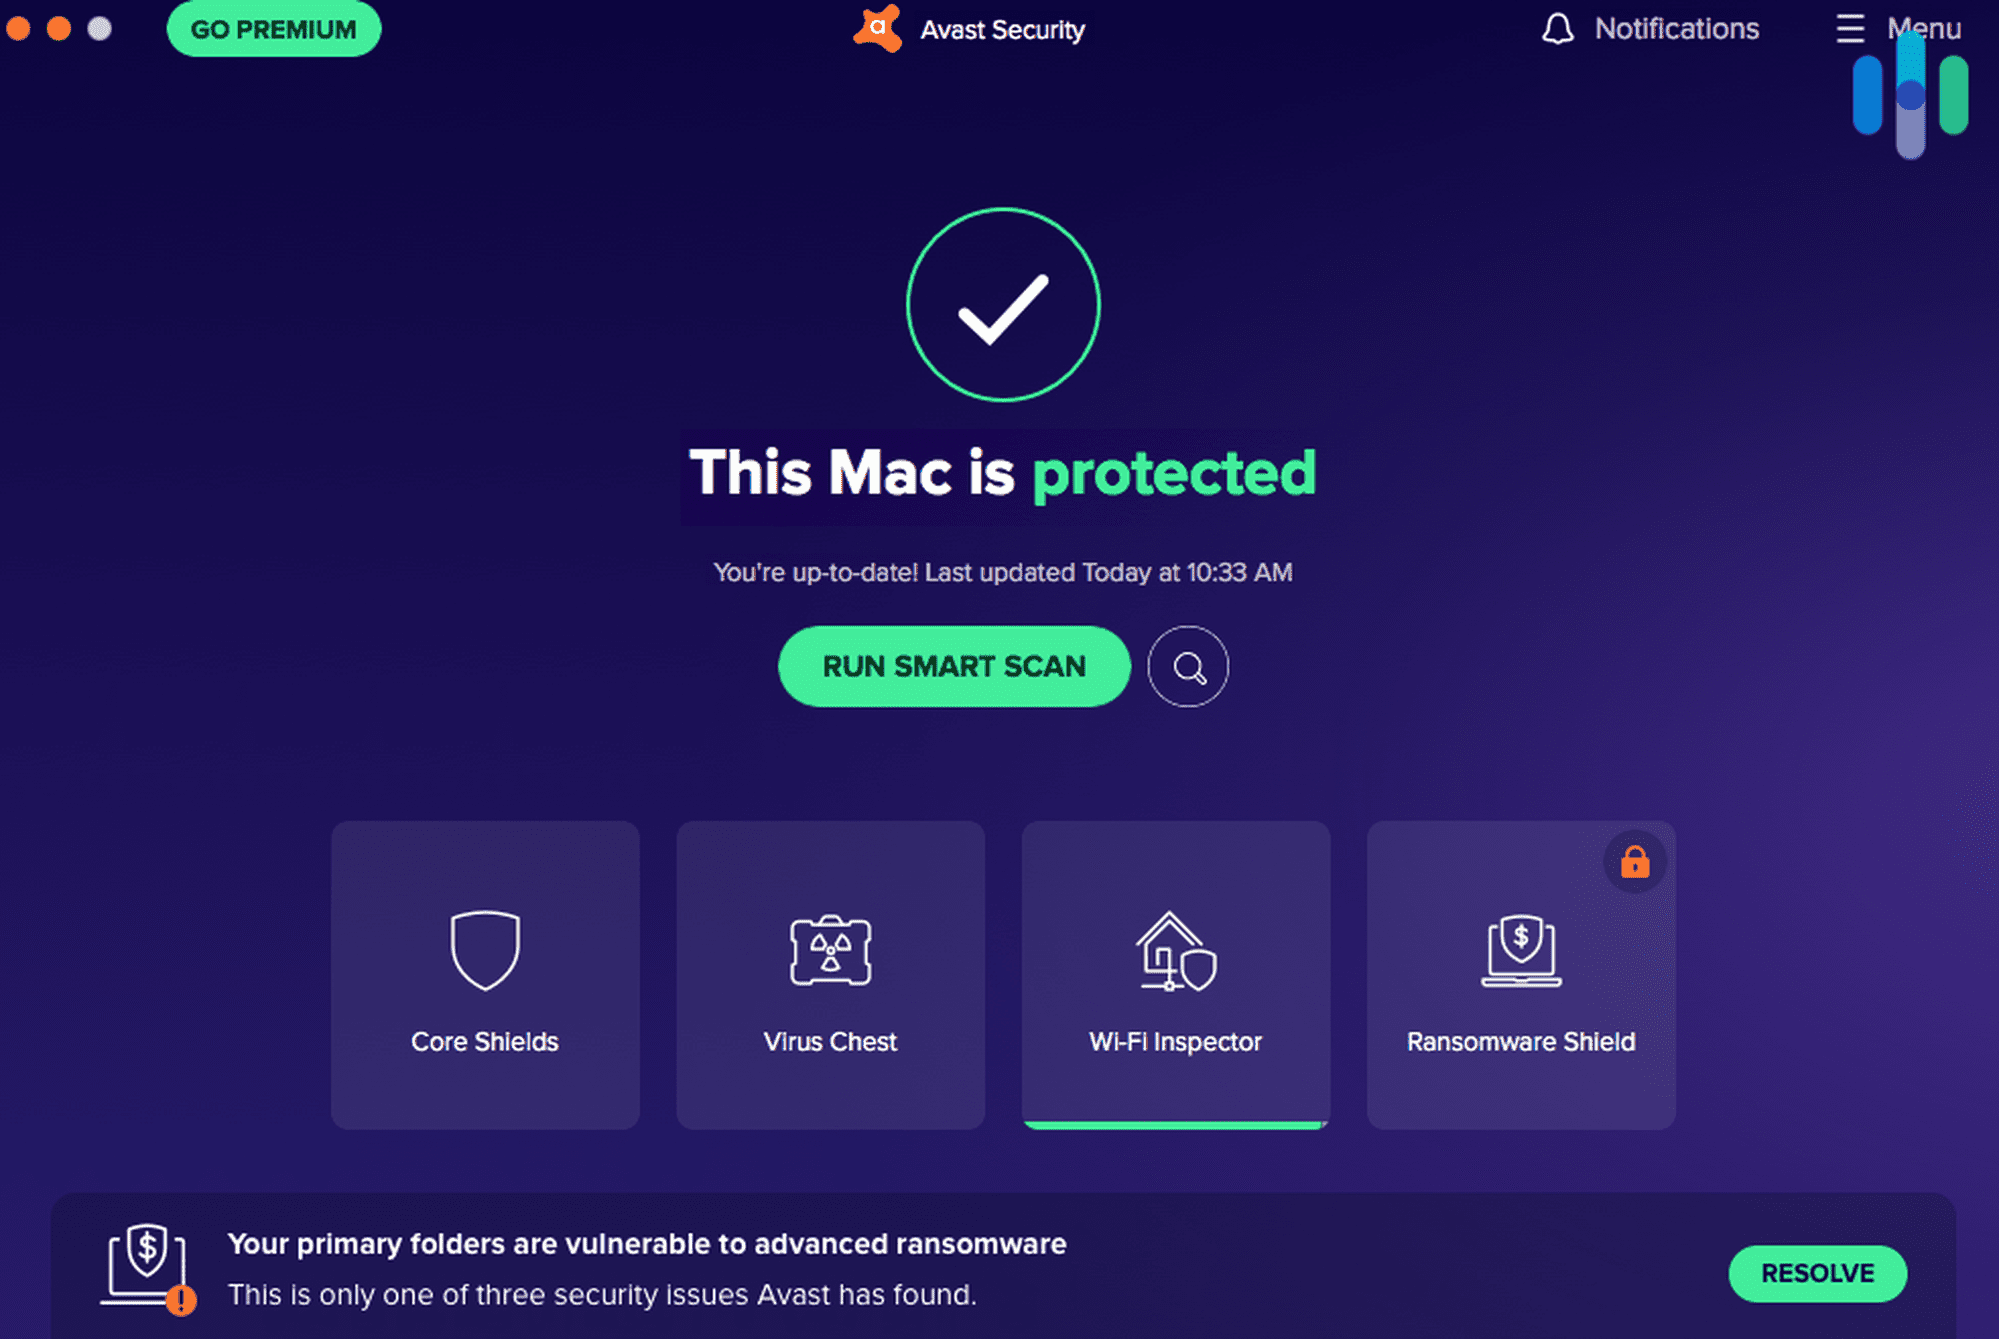 Allow the antivirus software to scan and detect any malware threats.
If any malware is found, follow the software's prompts to remove or quarantine the detected threats.